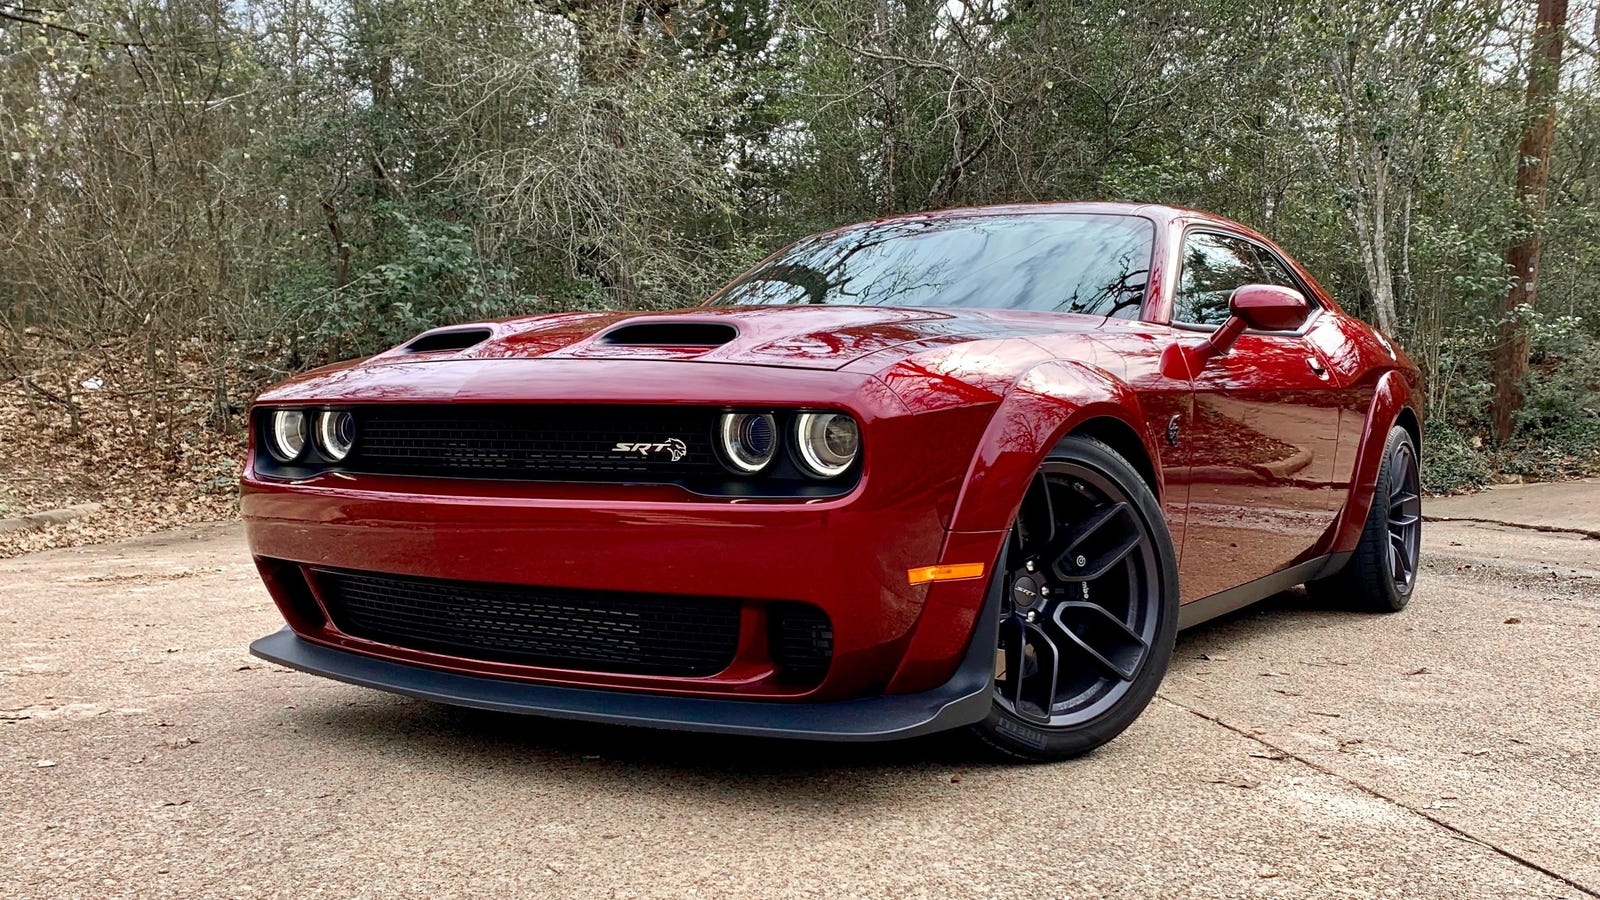 dodge eyes meaning What Do You Want to Know About the 2019 Dodge Challenger